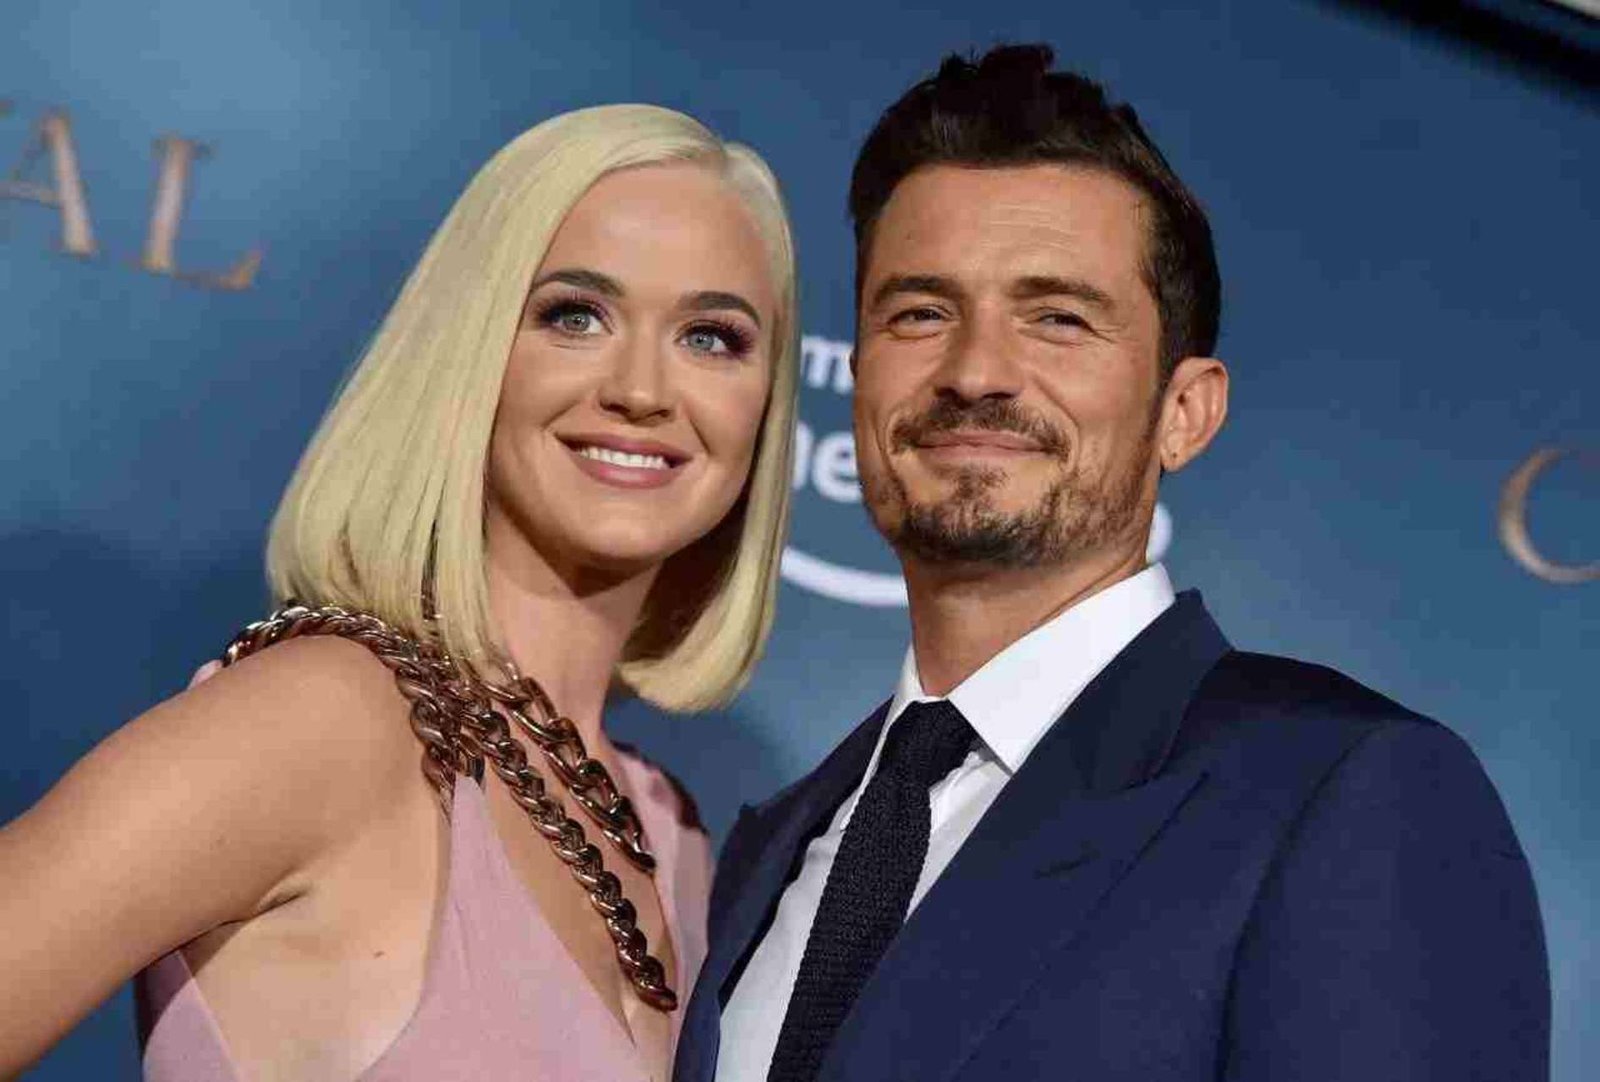 Orlando Bloom and Katy Perry's Relationship Status Sparks Speculation Amidst Recent Events